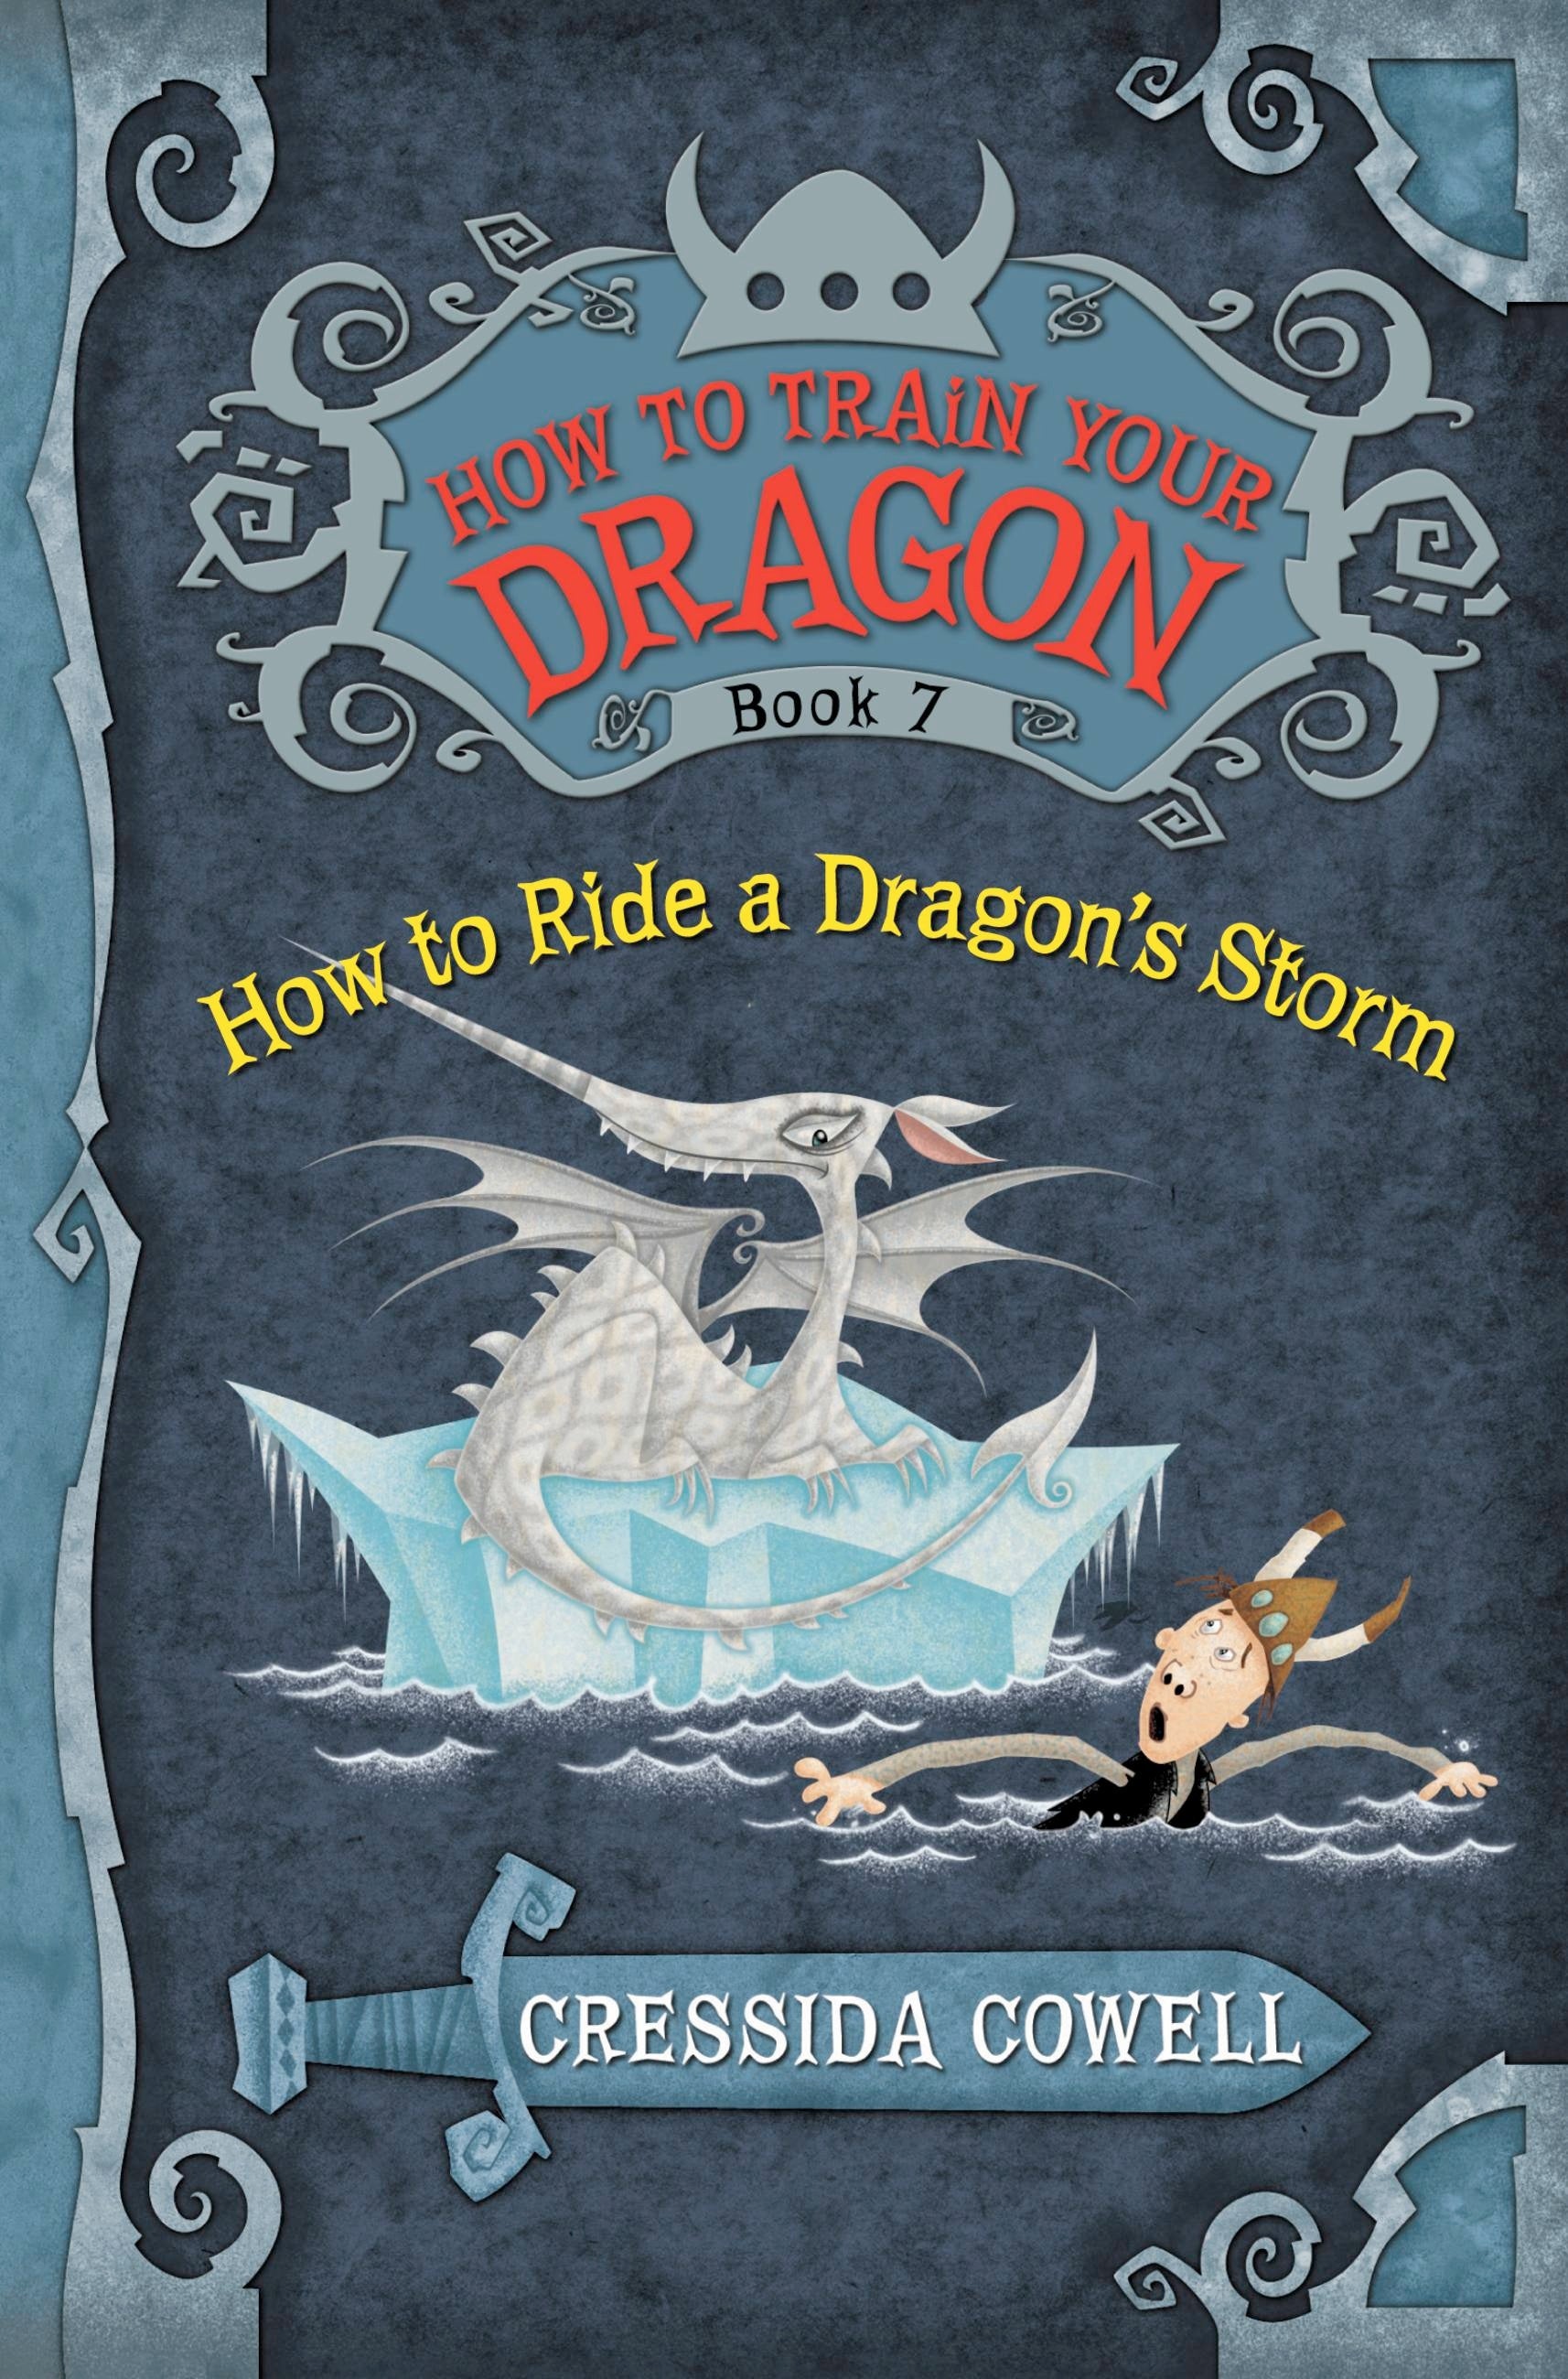 How to Train Your Dragon Book 7: How to Ride a Dragon's Storm: 07 (How to Train Your Dragon (7))